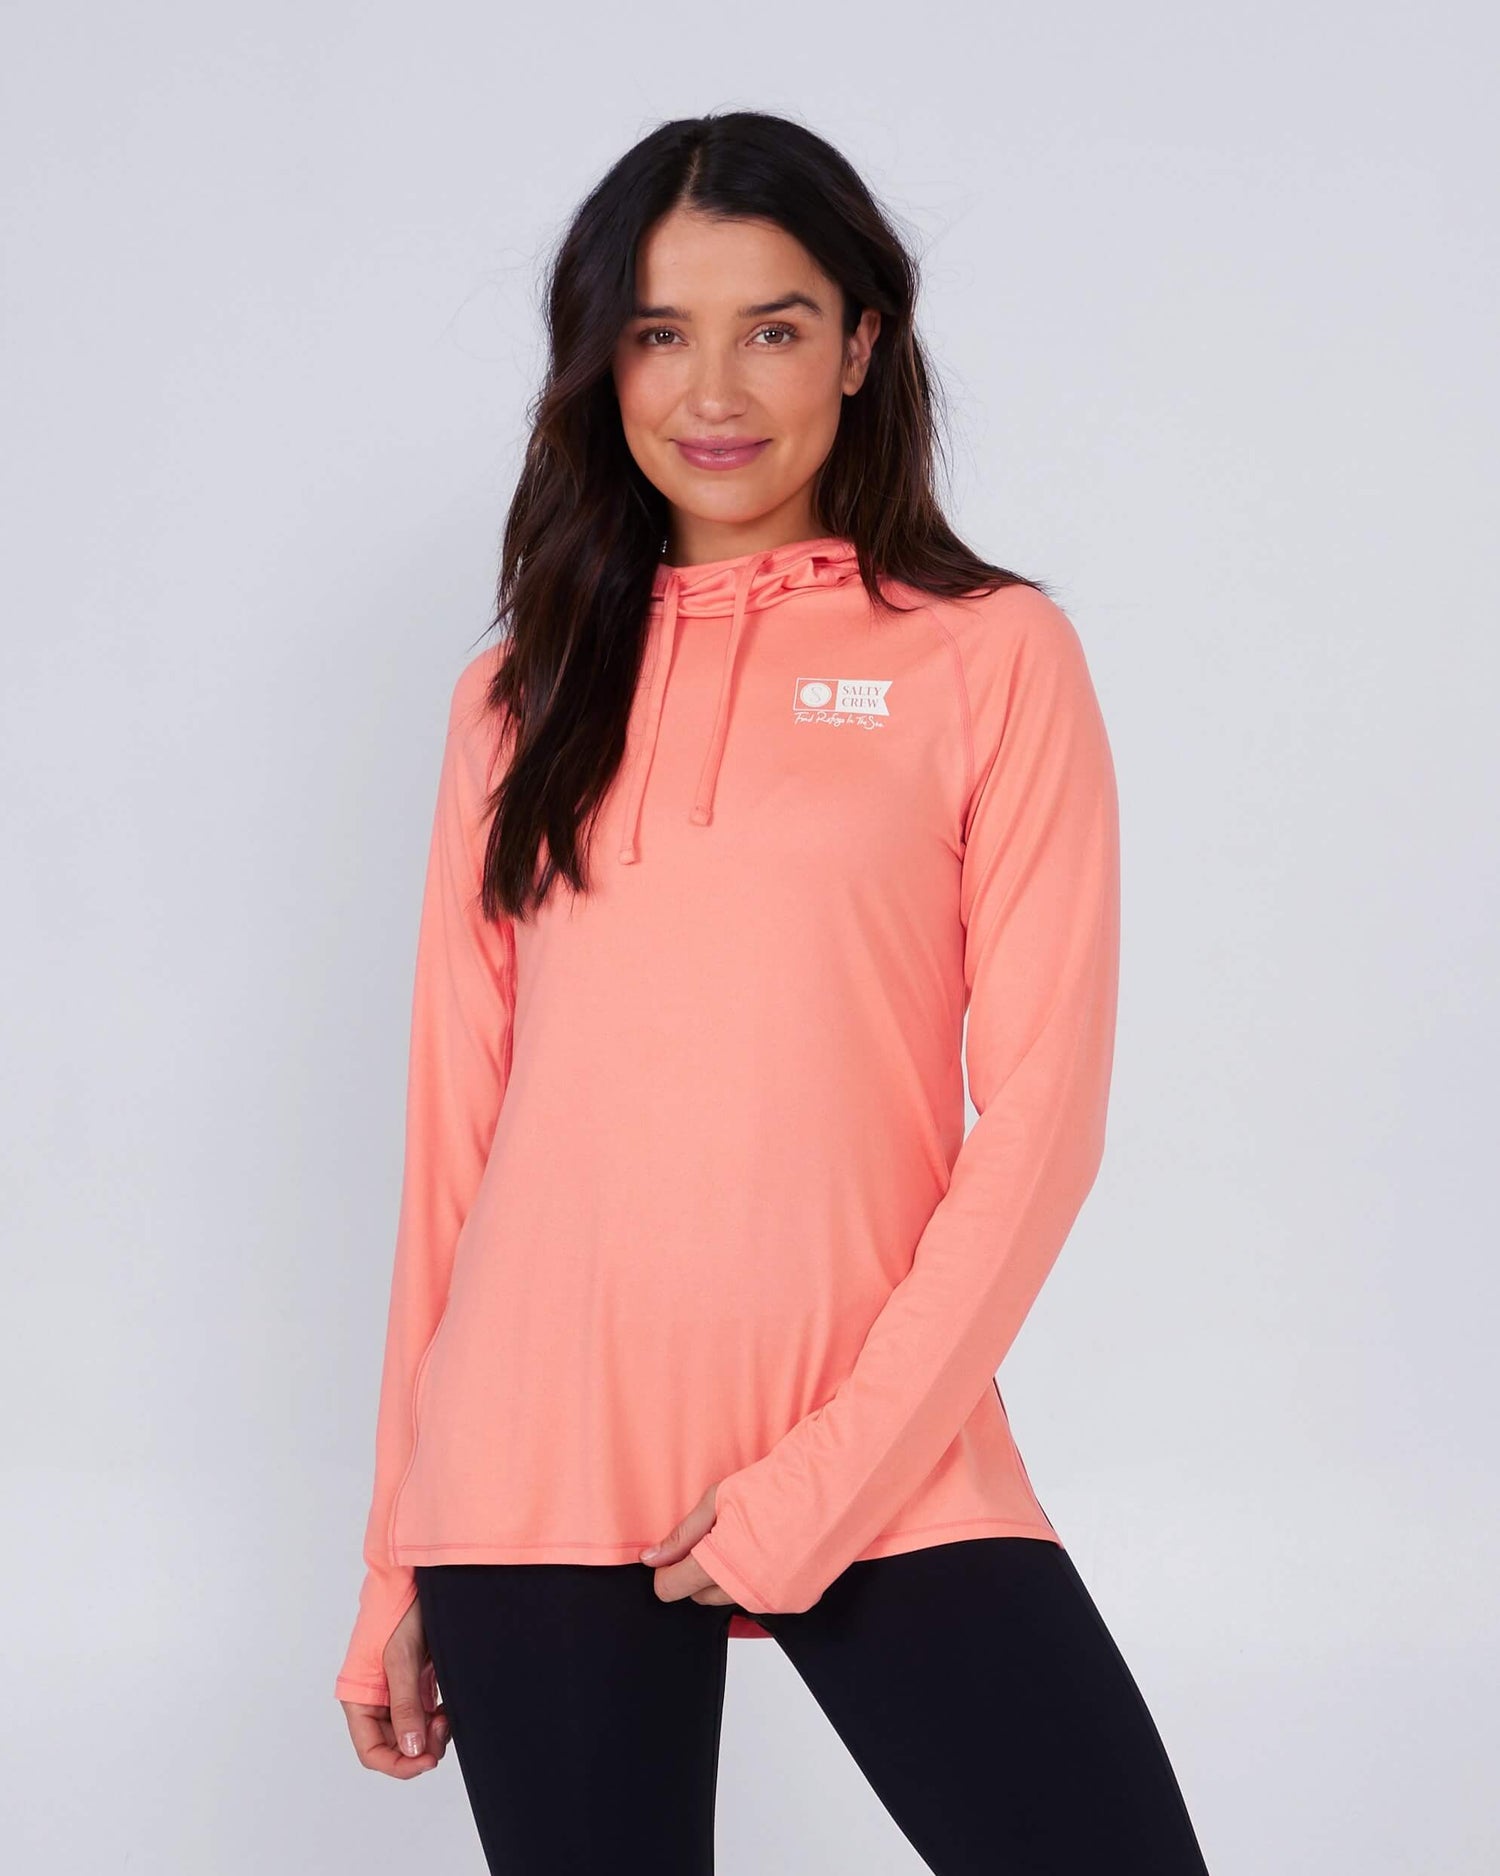 Salty Crew Womens - Thrill Seekers Hooded Sunshirt - Sunrise Coral